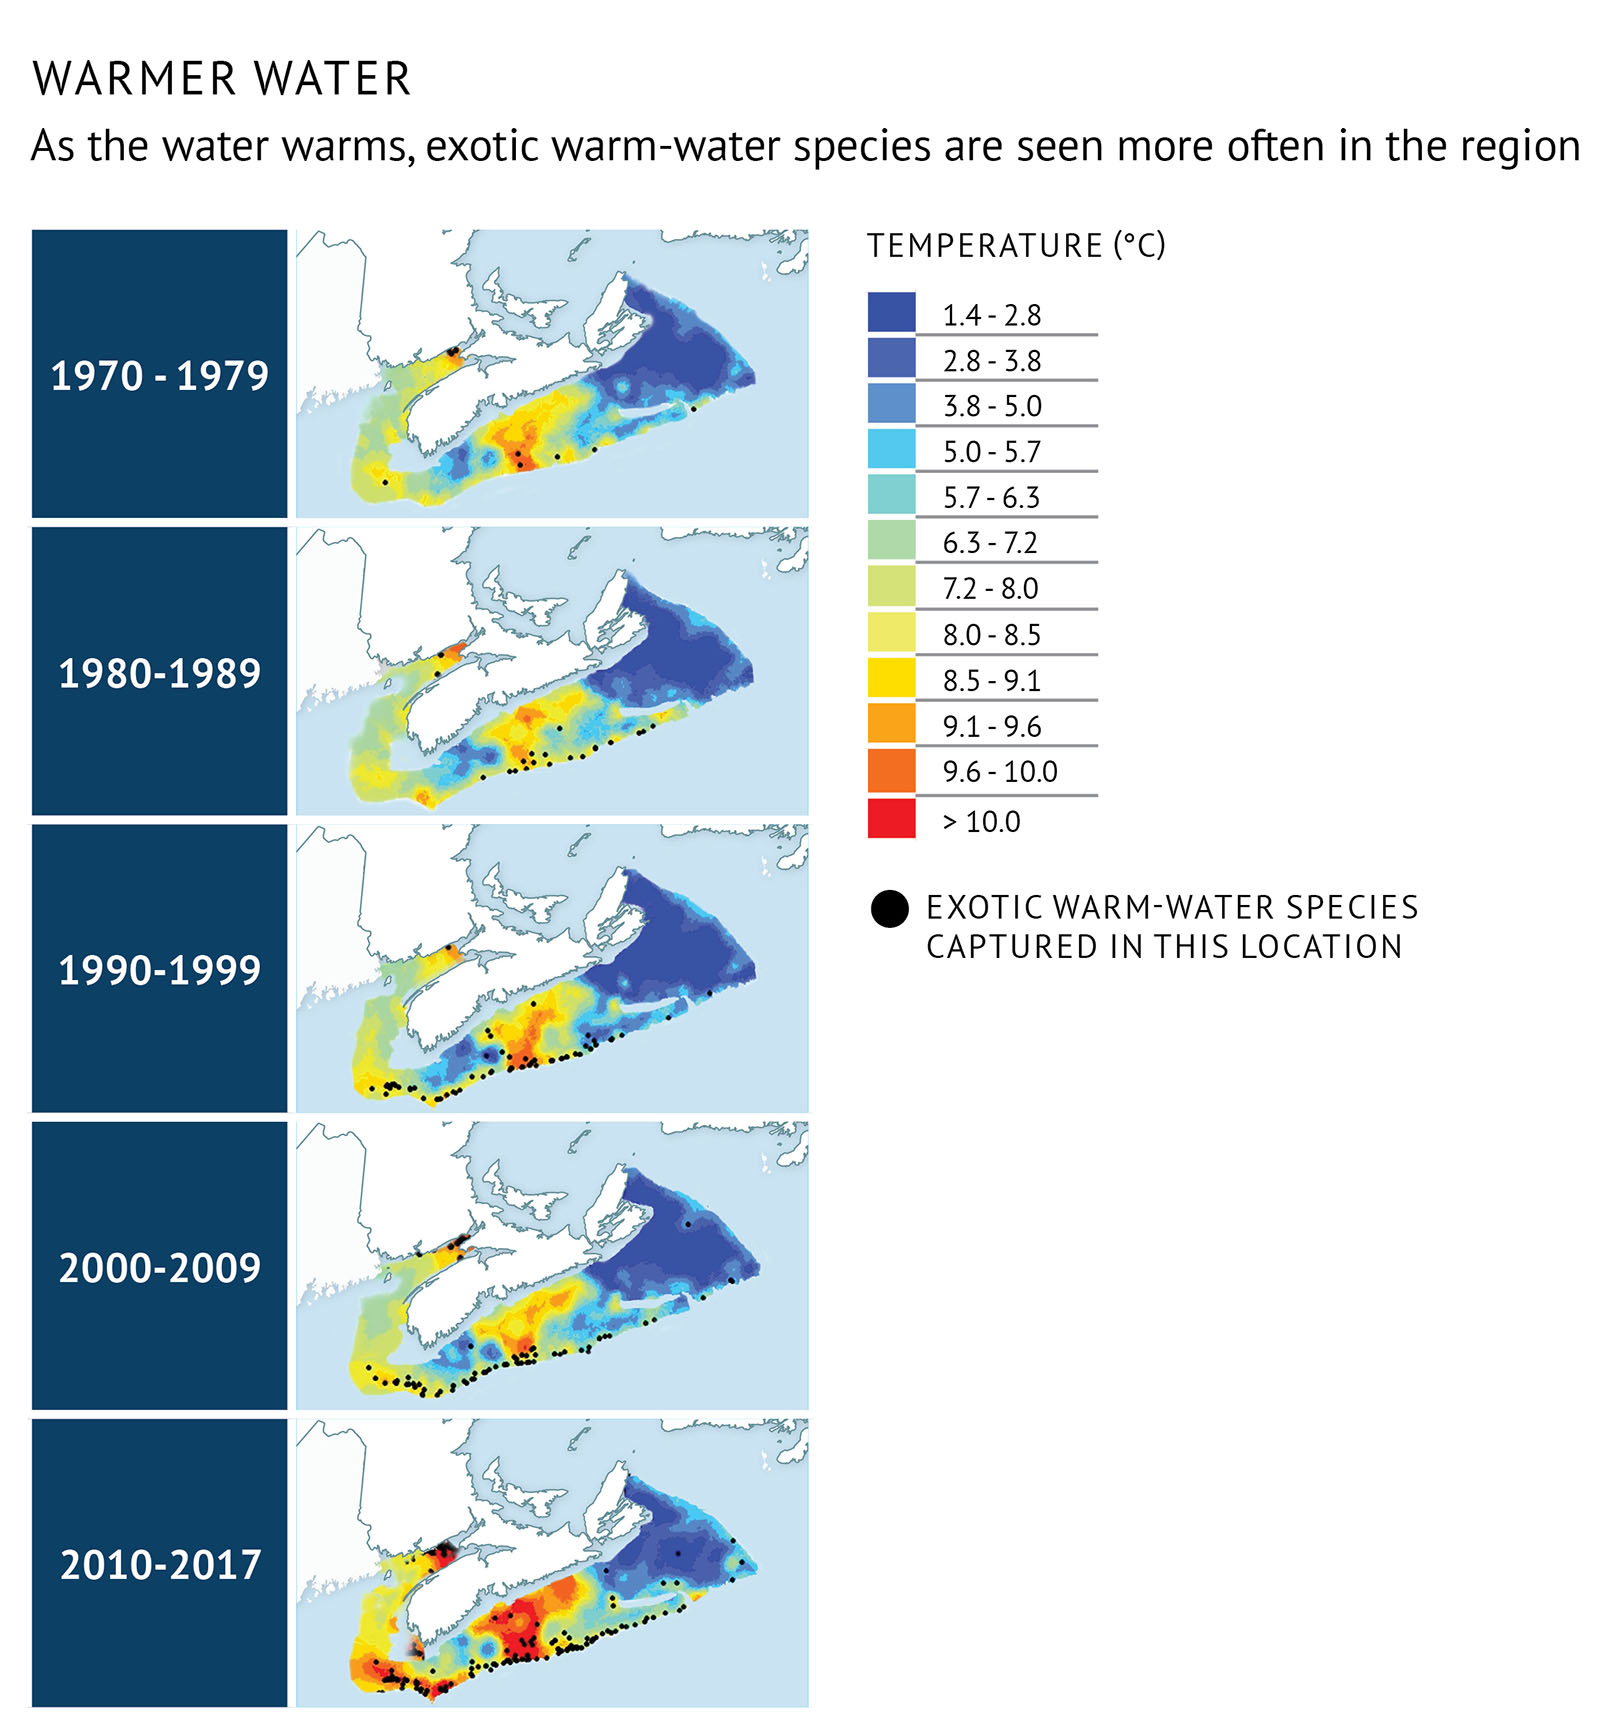 Figure 31: Distribution by decade of captures of warm-water fish species overlain on the average temperature for each time period. Black dots represent a fishing set in which at least one warm-water fish species was present. Recently, the number and frequency of warm-water species captures has increased. A caption at the top a line of text says “Warmer Water”. Another line of text under that says “As the water warms, exotic warm-water species are seen more often in the region”. Under the text, five vertically stacked maps from 1970 to 2017 show changes in water temperature and warm-water species captures over time. The maps represent 1970-1979, 1980-1989, 1990-1999, 2000-2009, and 2010-2017 respectively from top to bottom. Each map shows the same area of the east coast of Canada centred on New Brunswick and Nova Scotia and showing the Scotian Shelf from the Gulf of St. Lawrence in the north to Georges Bank in the southwest. The Scotian Shelf area of each map is shaded with colours representing the average temperature for each time period. A legend to the right of the maps shows the range of temperatures and the colours used to represent them on the map. There are 12 colours each representing a span of temperatures. A dark blue at the top of the legend represents the range of 1.4-2.8°C and at the bottom a red represents temperatures >10°C. Each colour represents a range of 0.4 to 1.4°C. At the bottom of the legend there is a black dot with text next to it that says “Exotic warm water species captured in this location”. On the top map, the colouring of the shelf shows an area of darker blue on the eastern end of Scotian Shelf. The colour then transitions to lighter blues and then yellow and orange in the middle of the Scotian Shelf. There is then a small area of blue further down and then more yellow in the shaded area which bends around the western end of Nova Scotia into the Bay of Fundy. A few black dots are scattered towards the middle and bottom edges of the Scotian Shelf. Another few dots are located at the top of the Bay of Fundy. This general pattern of colour shading is seen on each map but the yellow and orange areas get darker and wider moving down the stack indicating that the temperature is increasing over time especially in the middle of the Shelf and near the bottom edge. The number of black dots also increases and they are generally located in the middle to western edges of the Scotian Shelf and upper Bay of Fundy with a few scattered in other areas.